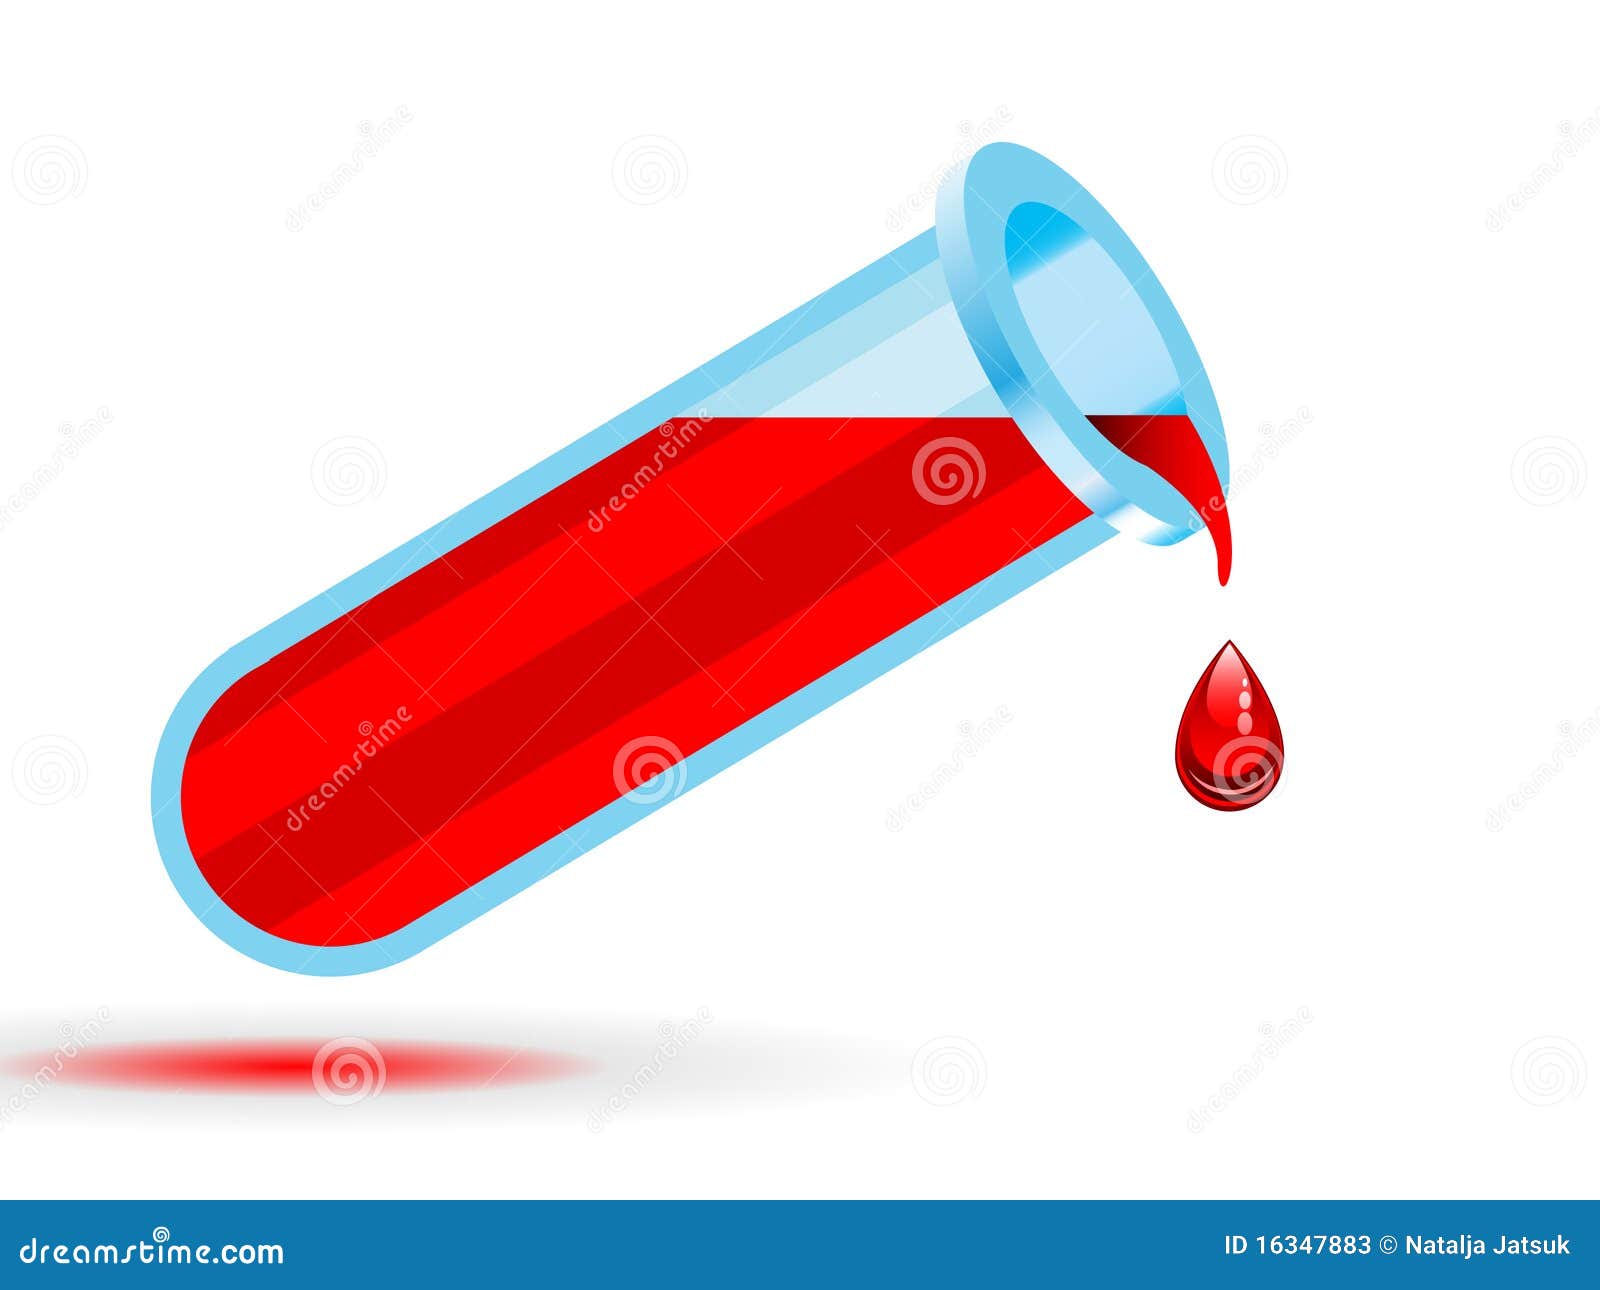 clipart blood sample - photo #19